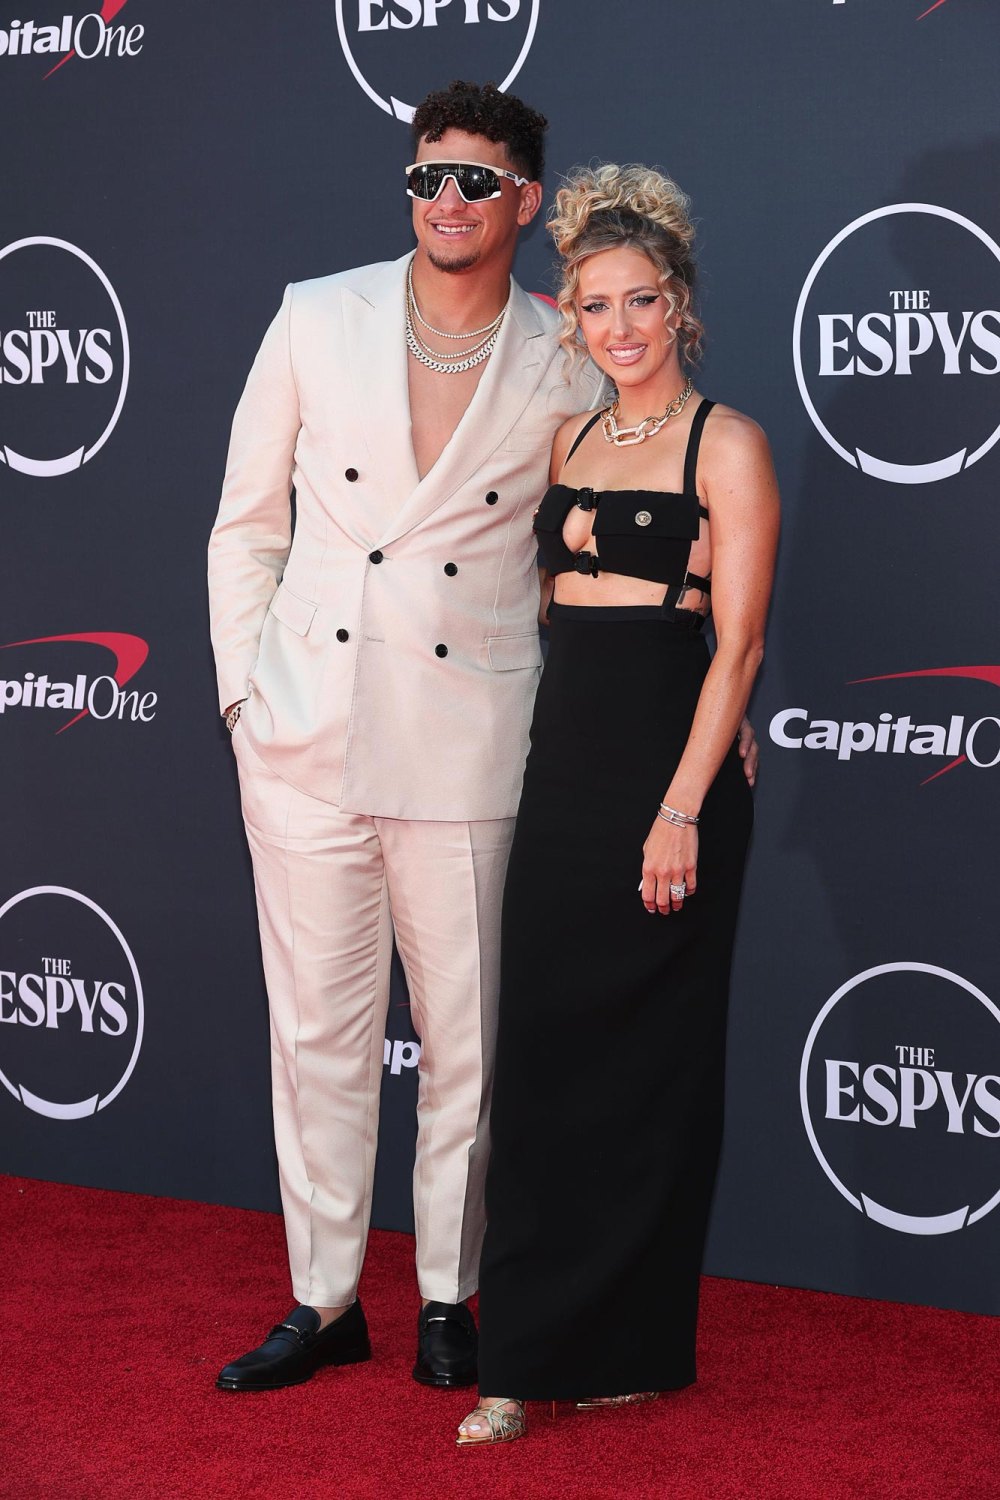 Patrick Mahomes and Wife Brittany Mahomes Gush About Off-Season Family Time at the 2023 ESPYs 282